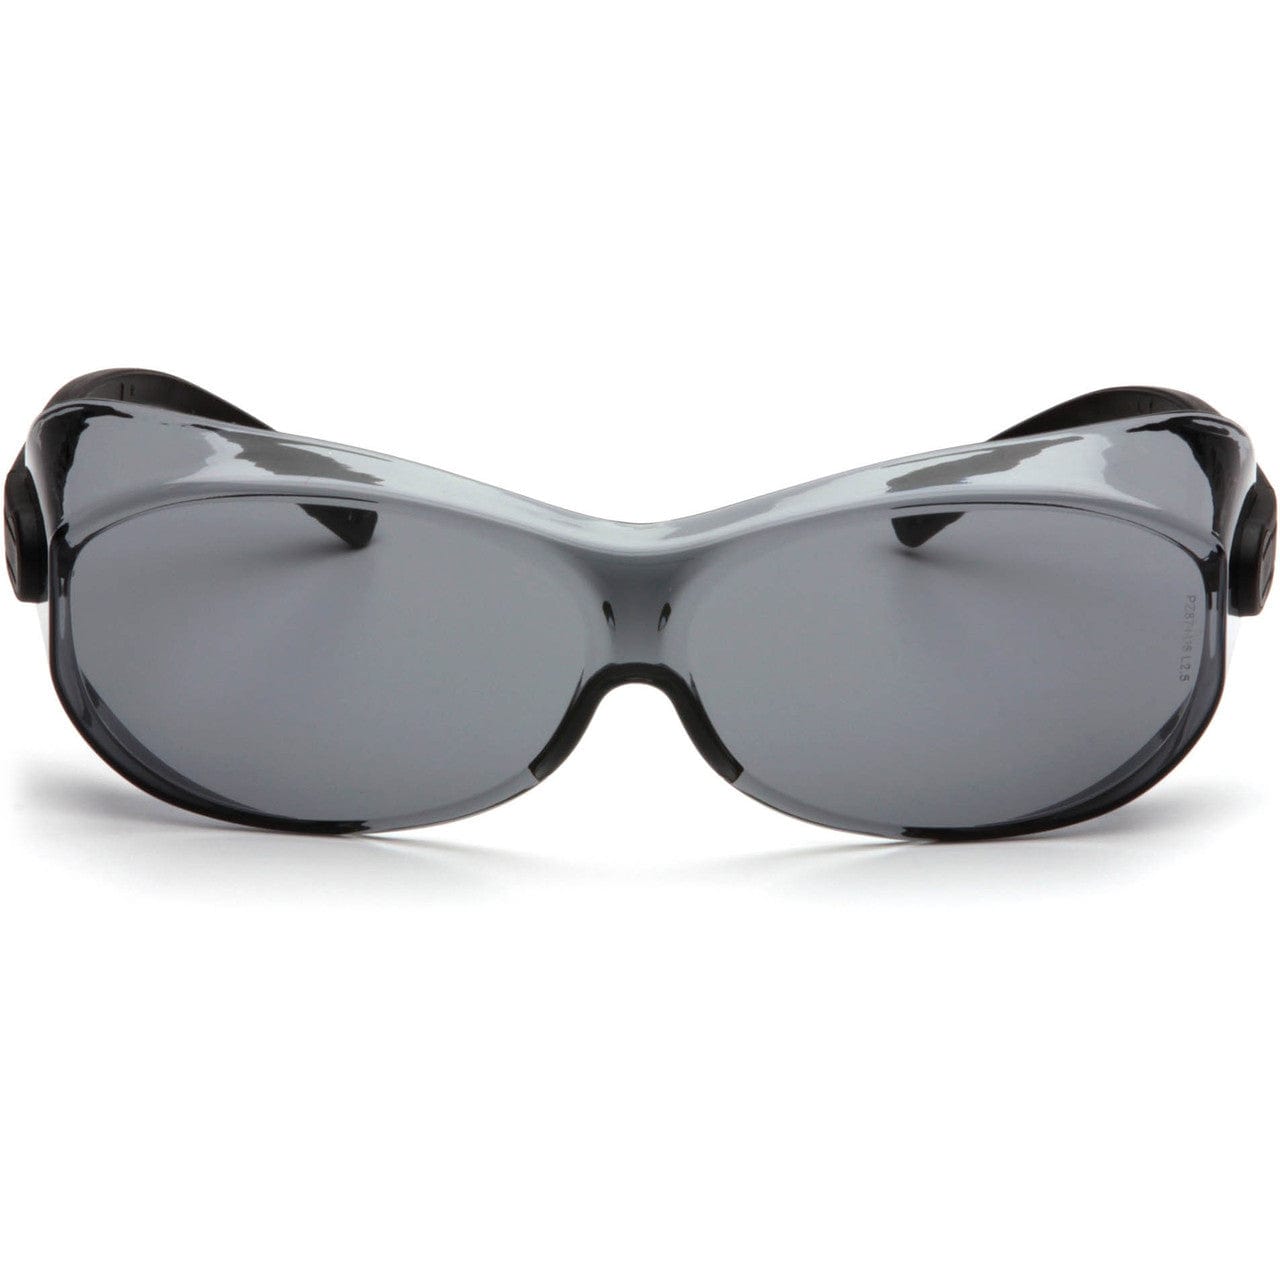 Pyramex OTS XL S7520SJ Over-Prescription Safety Glasses with Large Gray Lens Front View